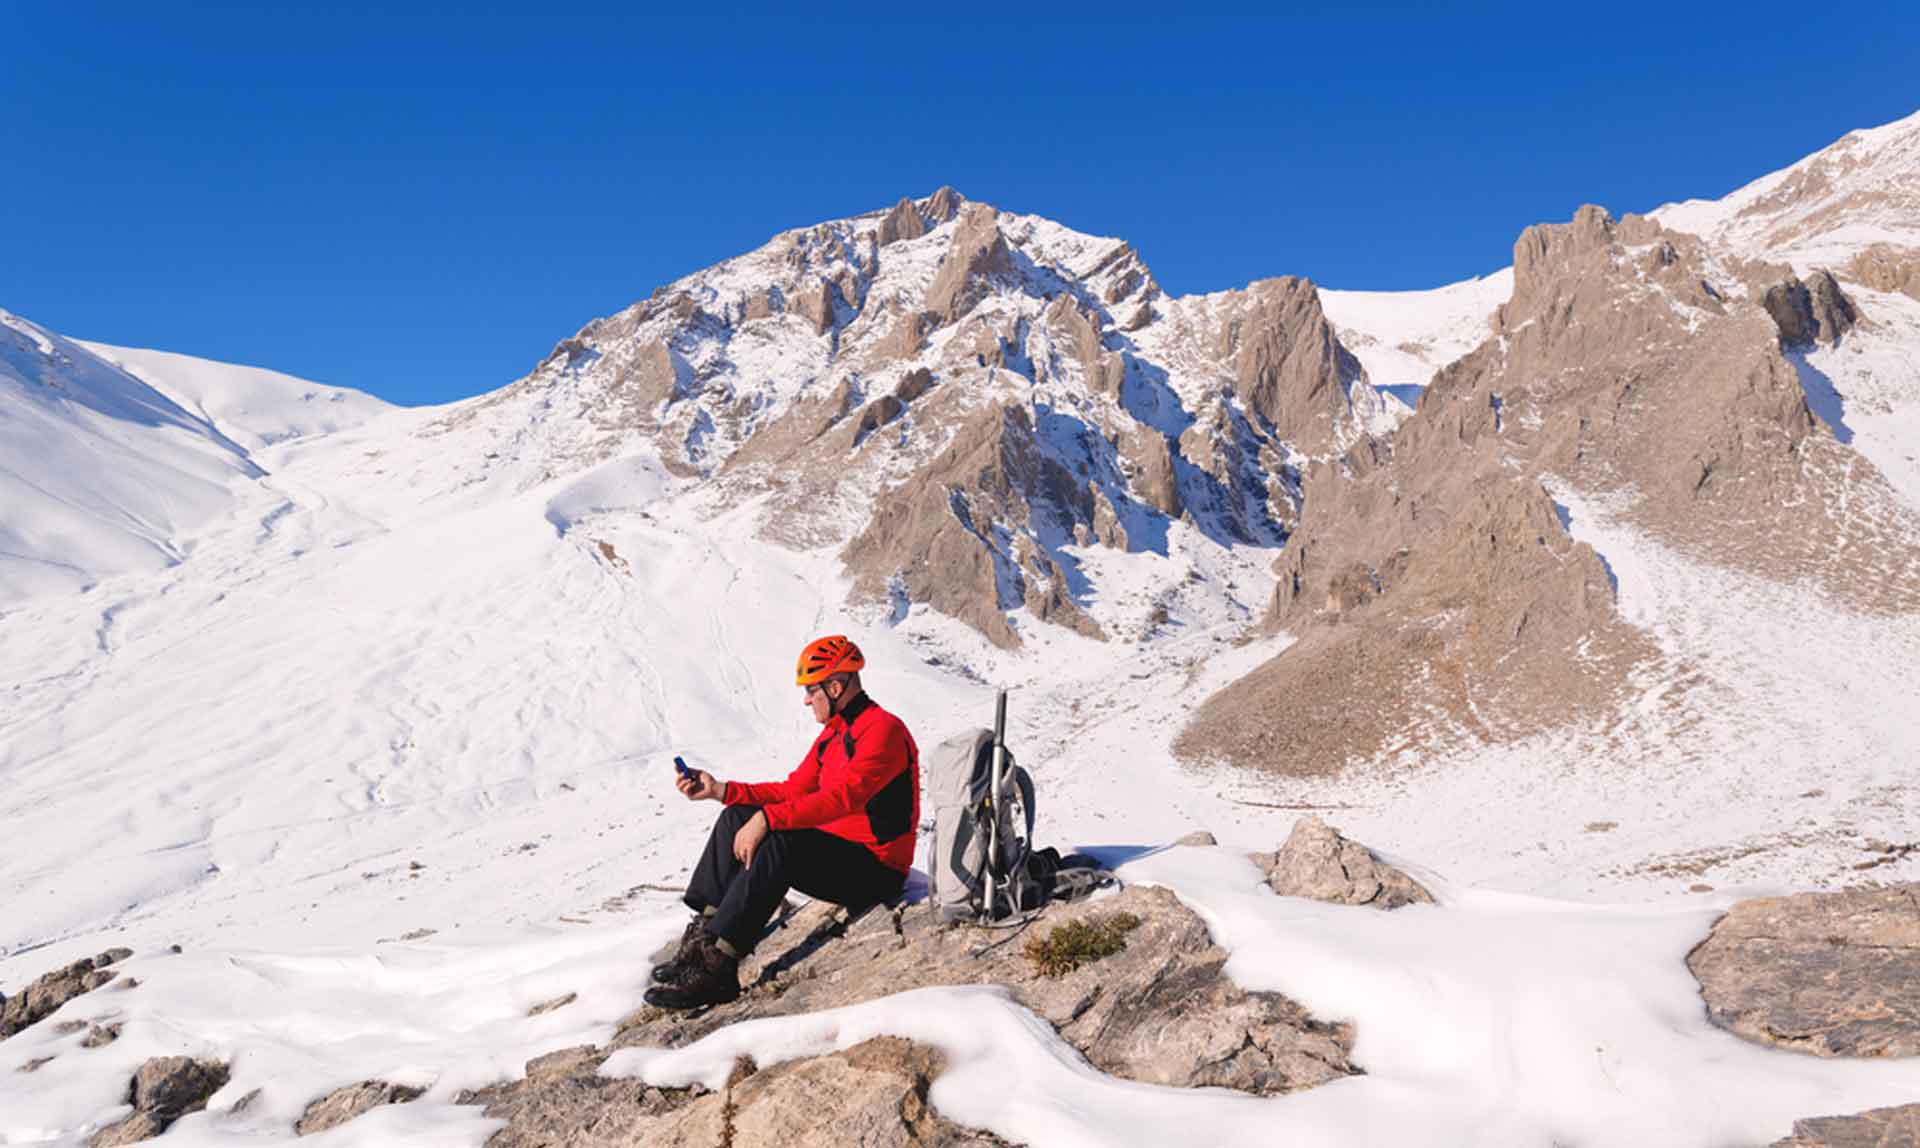 man sat on a snowy mountain placing an order using his phone